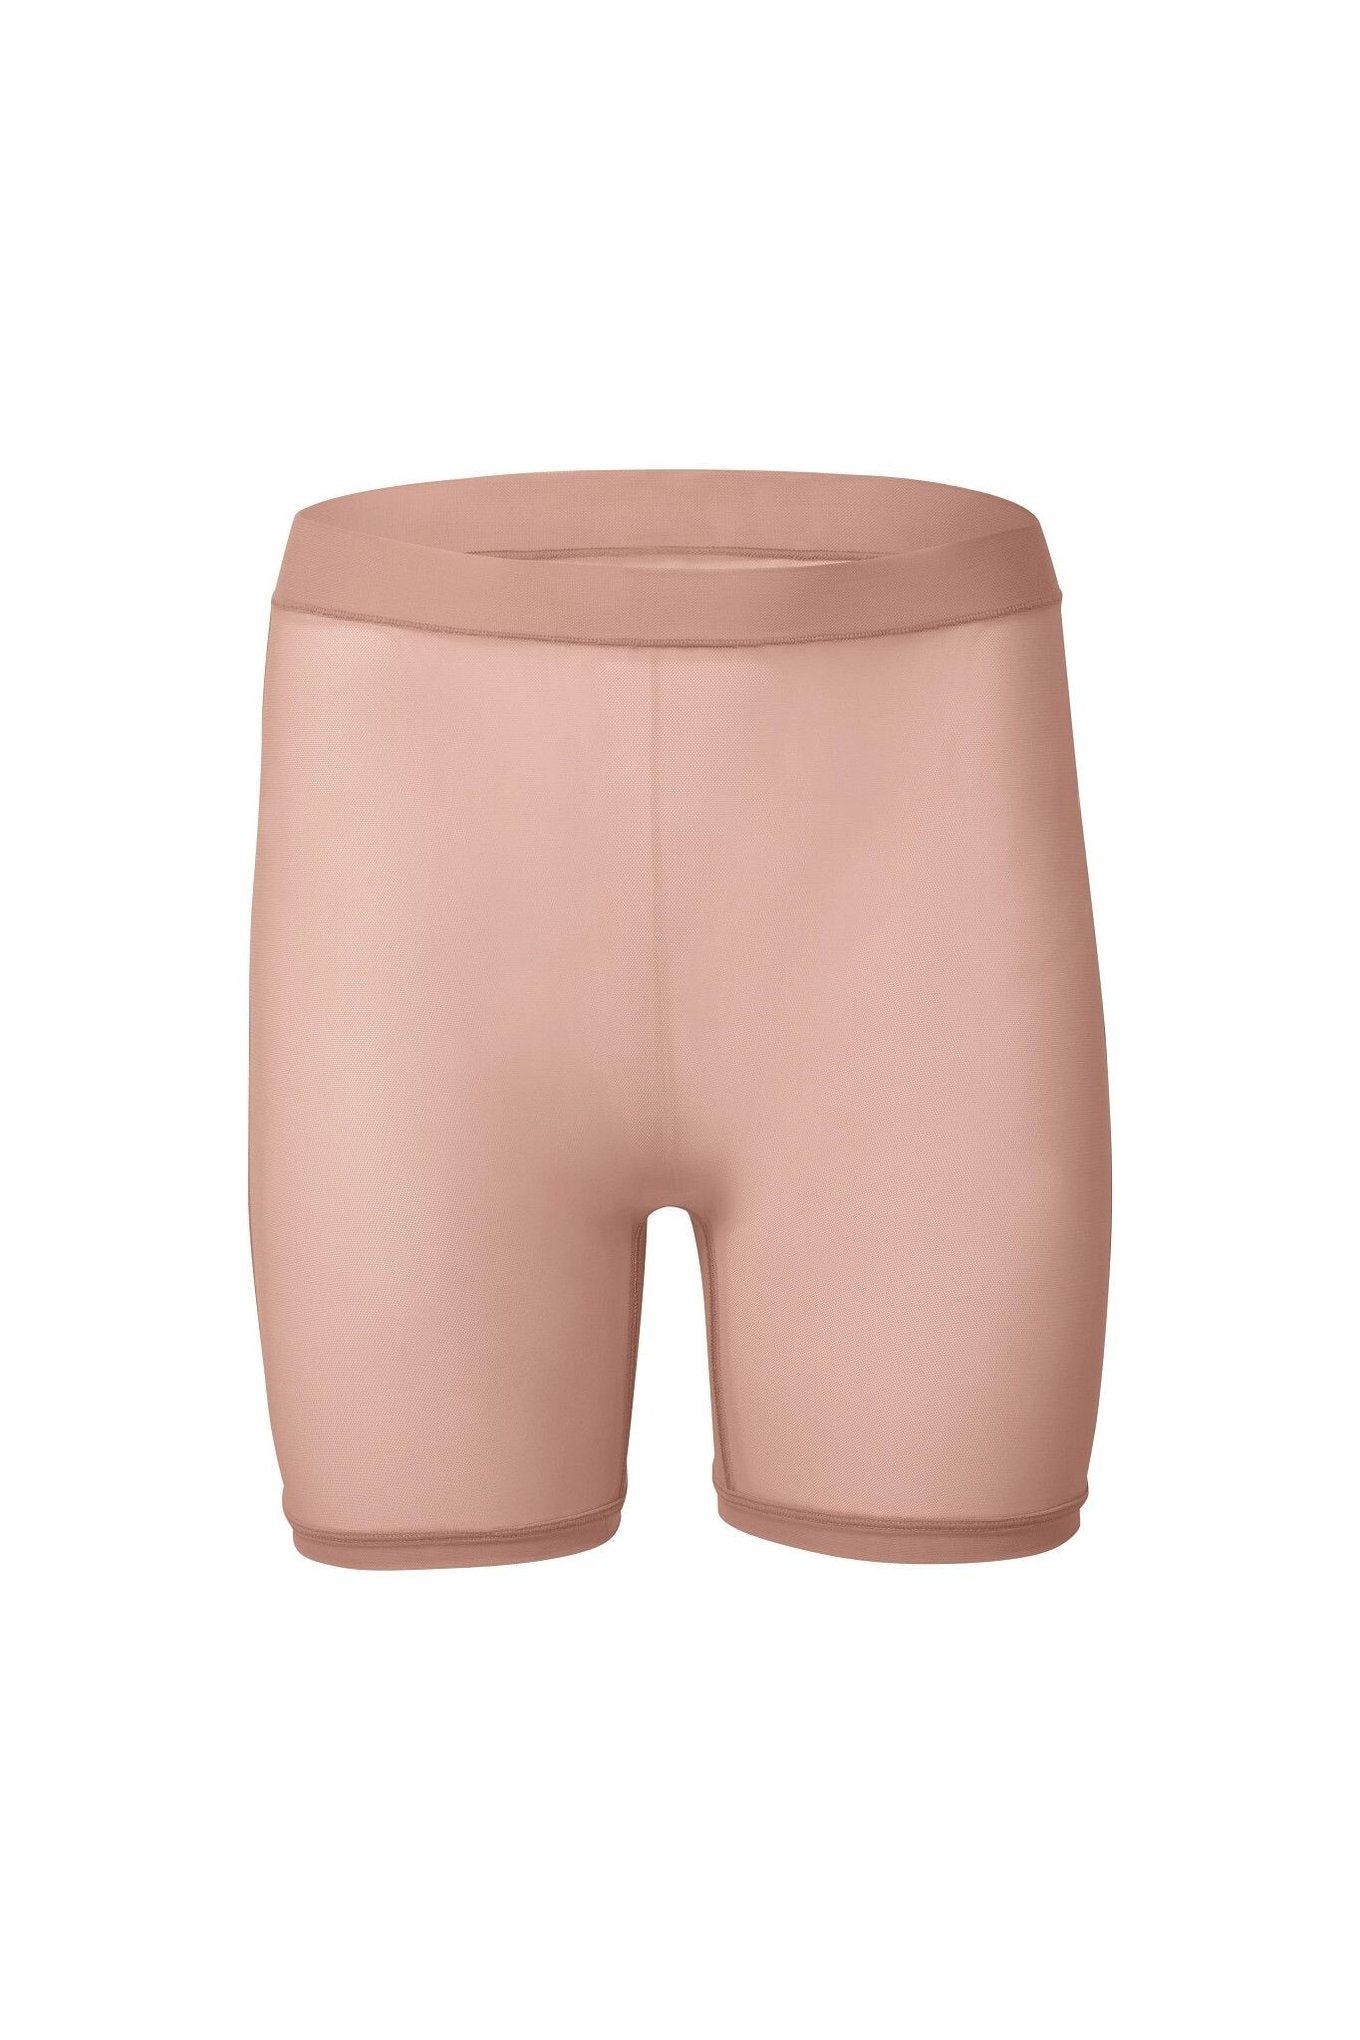 nueskin Dina Mesh High-Rise Shortie in color Rose Cloud and shape shortie